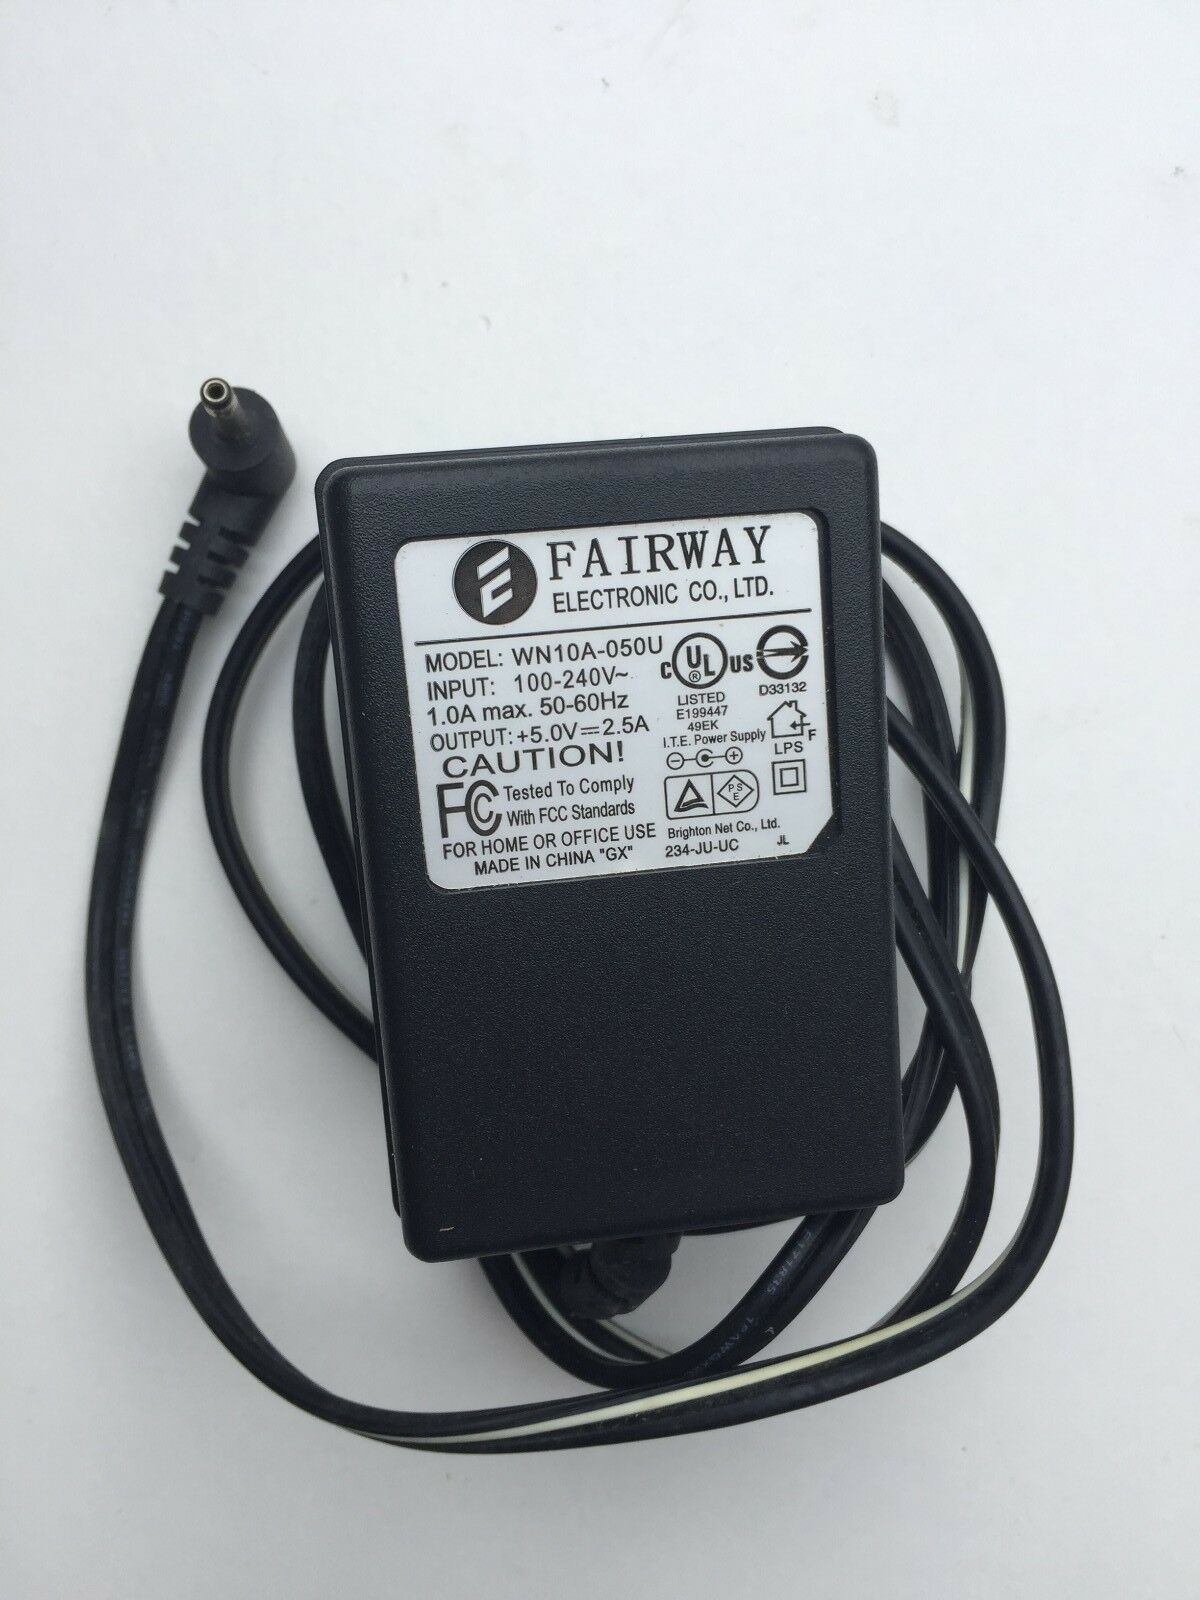 Fairway Electronic Co. WN10A-050U 5V 2.5A Power Supply AC Adapter Charger Cord Model: WN10A-050U Brand: FairWay Colo